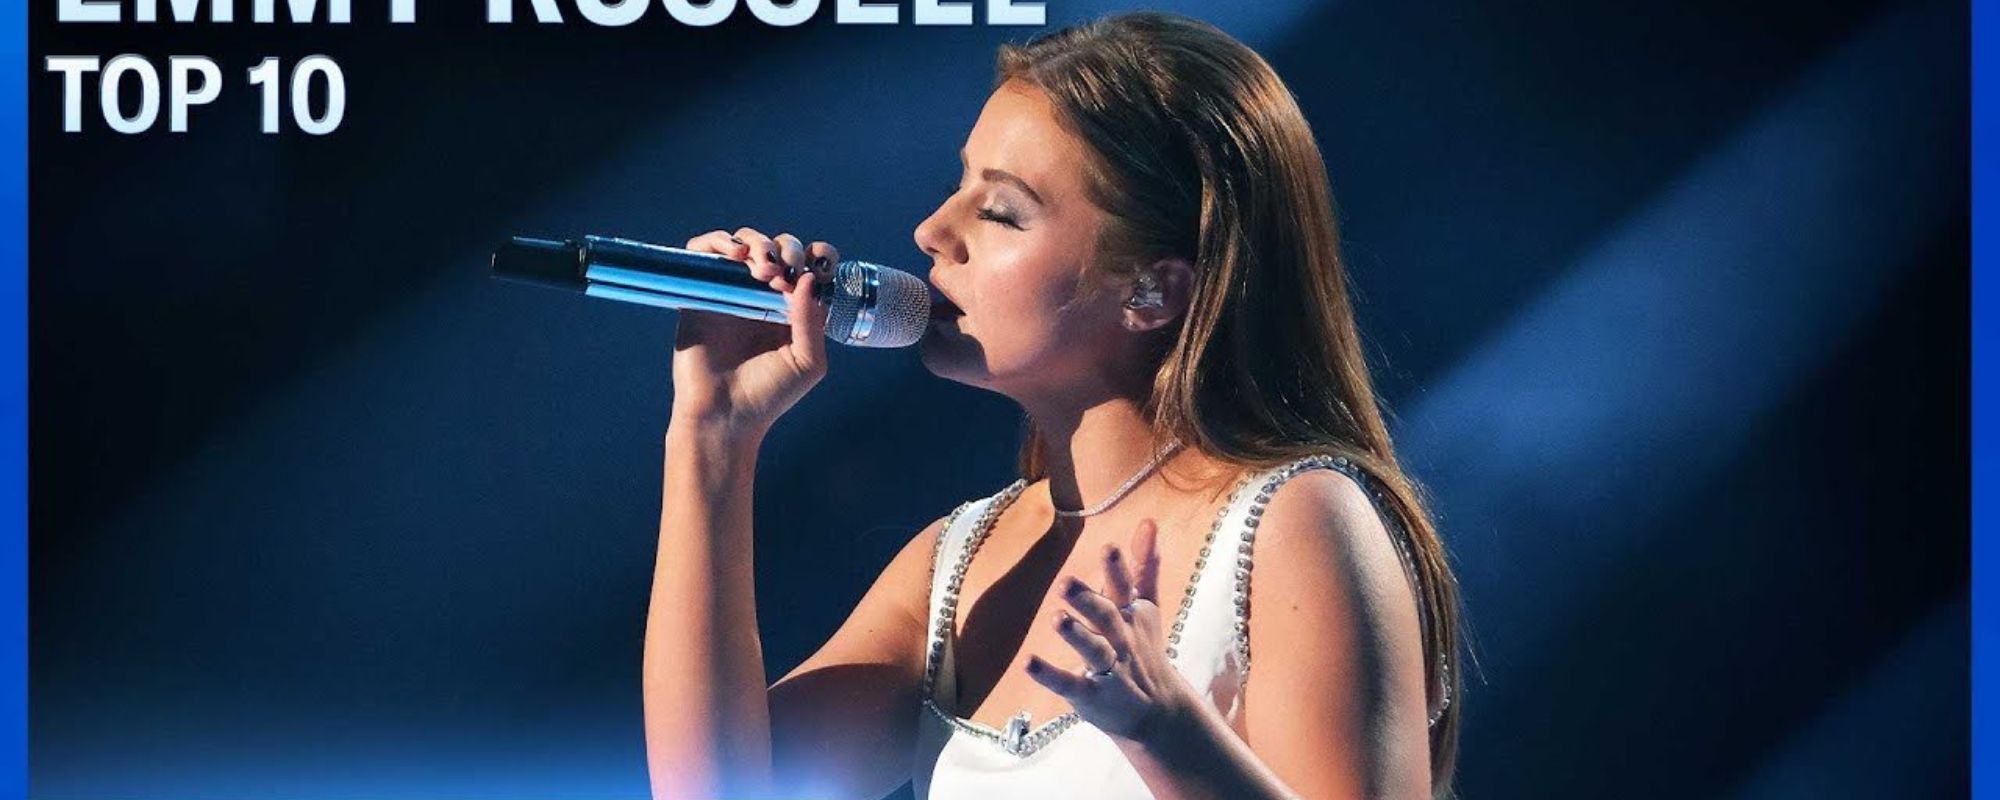 Emmy Russell Delivers Haunting Rendition of Adele Song on 'American Idol'